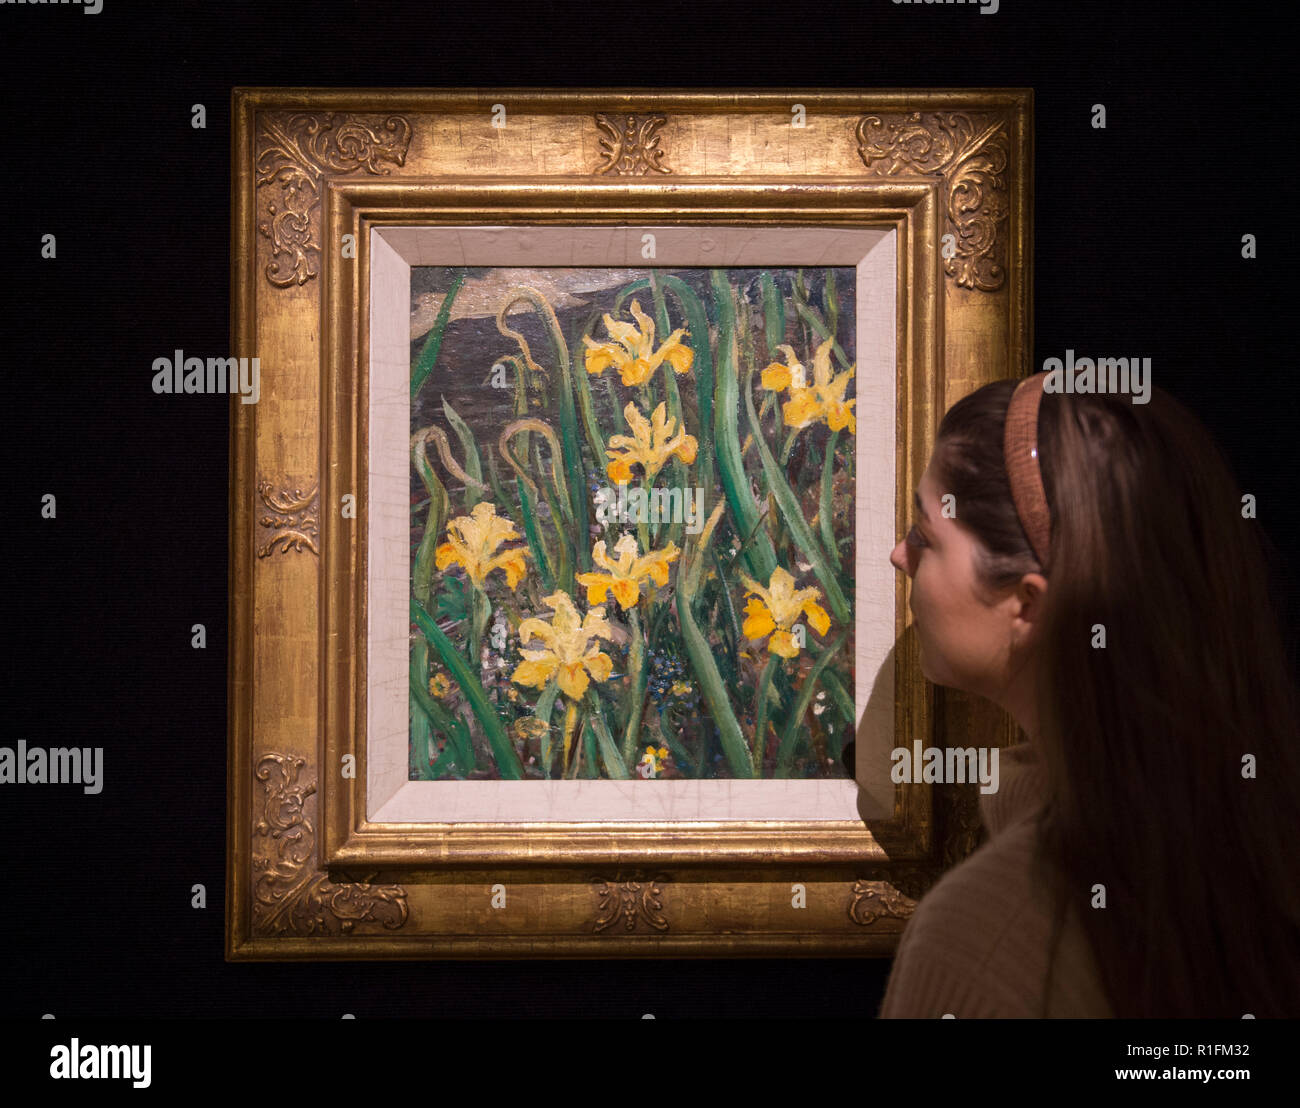 Bonhams, New Bond Street, London, UK. 12 November, 2018. Mask, an extremely rare sculpture by Henry Moore, is being offered at Bonhams Modern British and Irish Art sale for the first time in more than 80 years, and has never before been put up for auction. Image: Christopher Richard Wynne Nevinson ARA, Marsh Iris, c.1935, estimate £8,000-12,000. Credit: Malcolm Park/Alamy Live News. Stock Photo